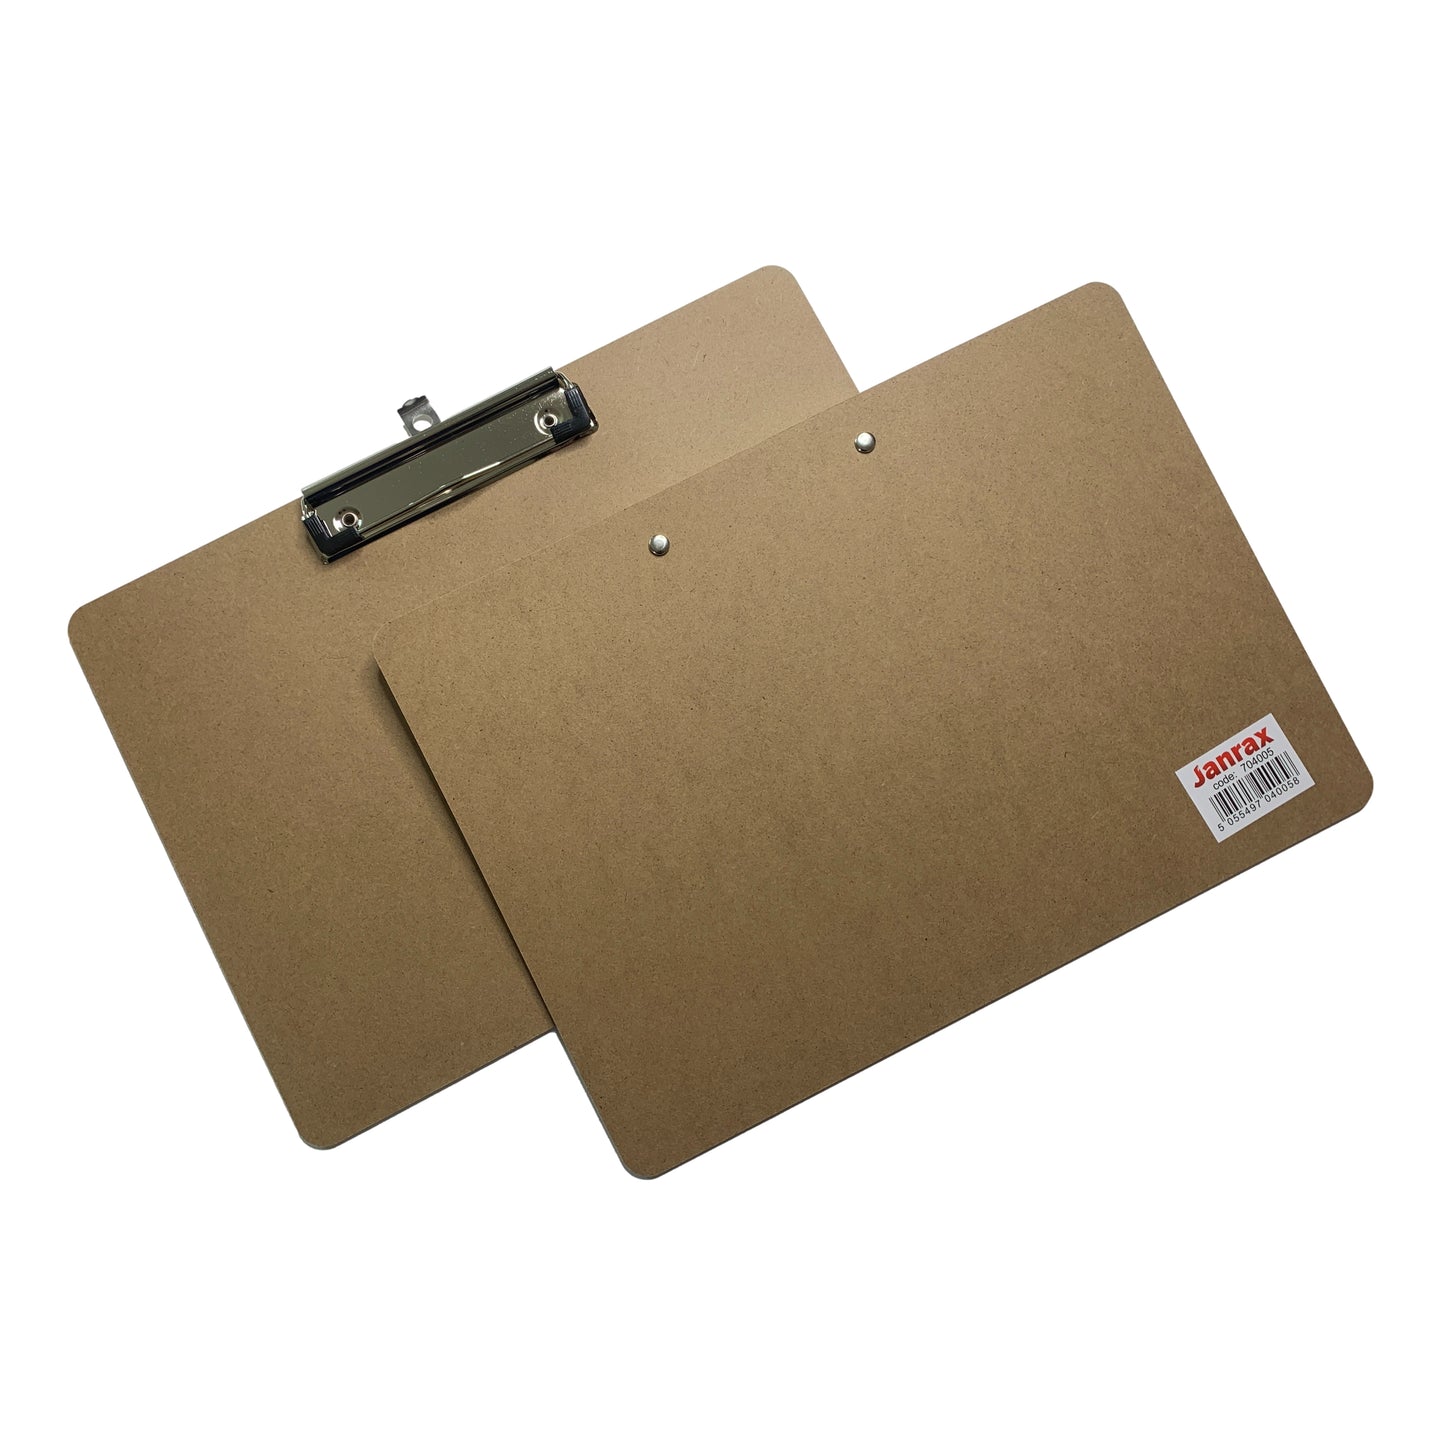 Pack of 12 A4 Wooden Horizontal Clipboards by Janrax